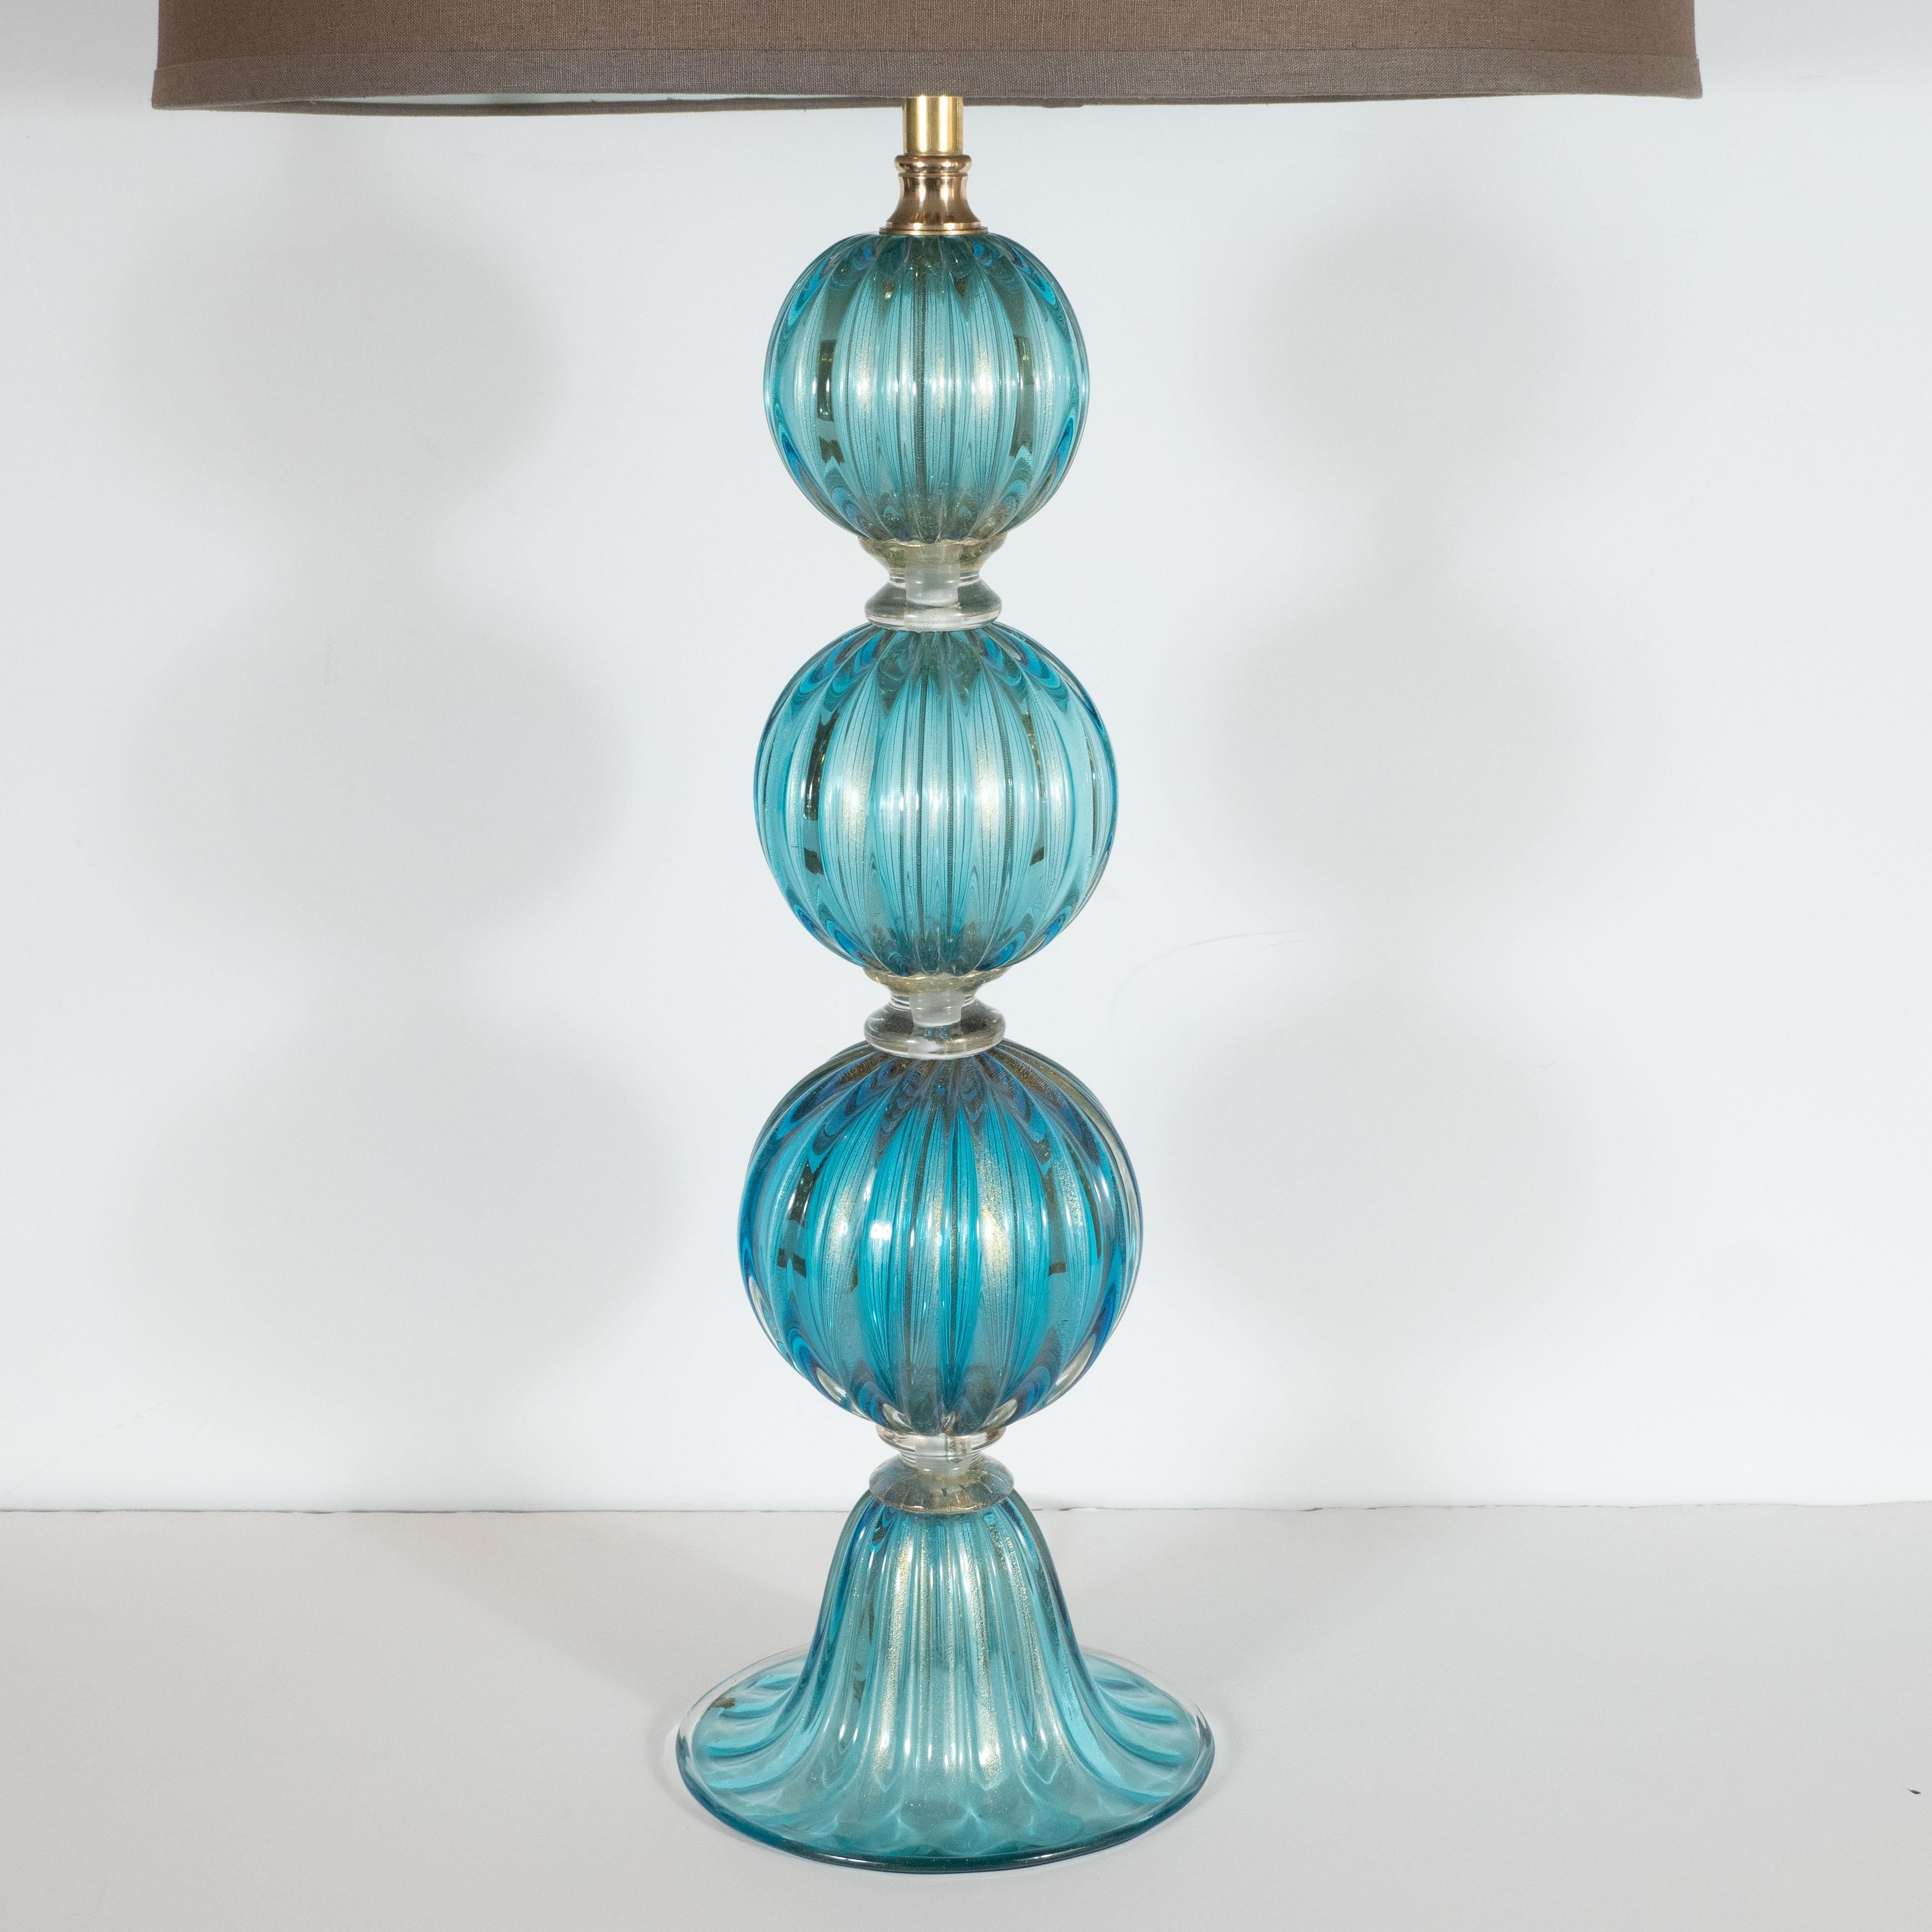 This sophisticated pair of modernist table lamps were hand blown in Murano, Italy, the island off the coast of Venice renowned for centuries for its superlative glass production. It features three ribbed orbital forms ascending from a gently concave